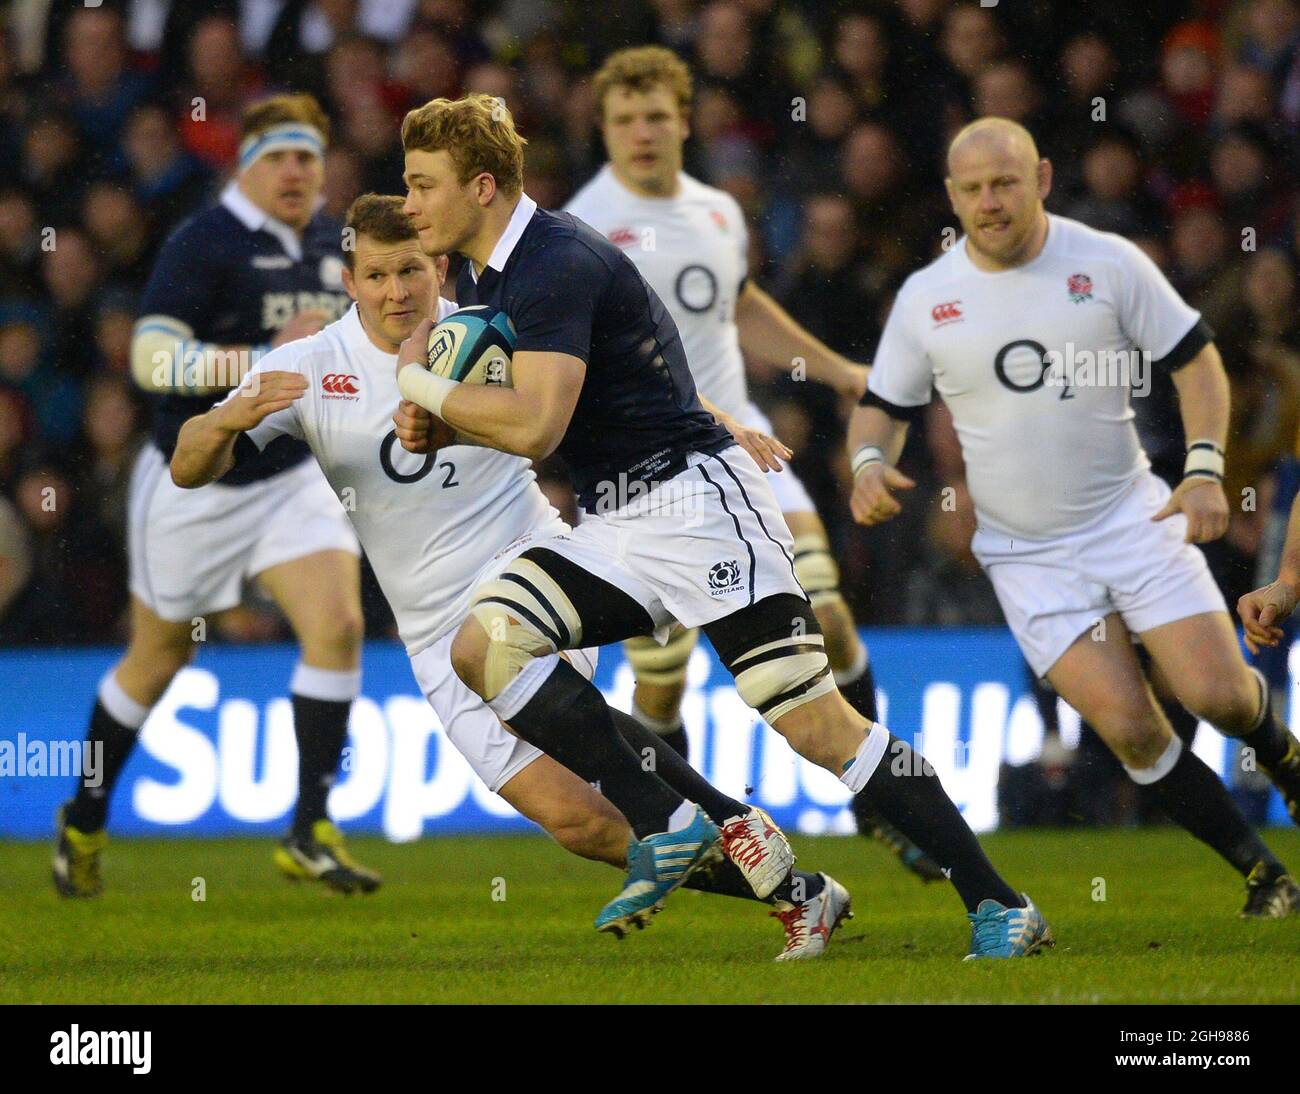 Dave Denton of Scotland in action during the RBS 6Nations match between Scotland and England at Murrayfield Stadium, Edinburgh on February 8, 2014. Stock Photo